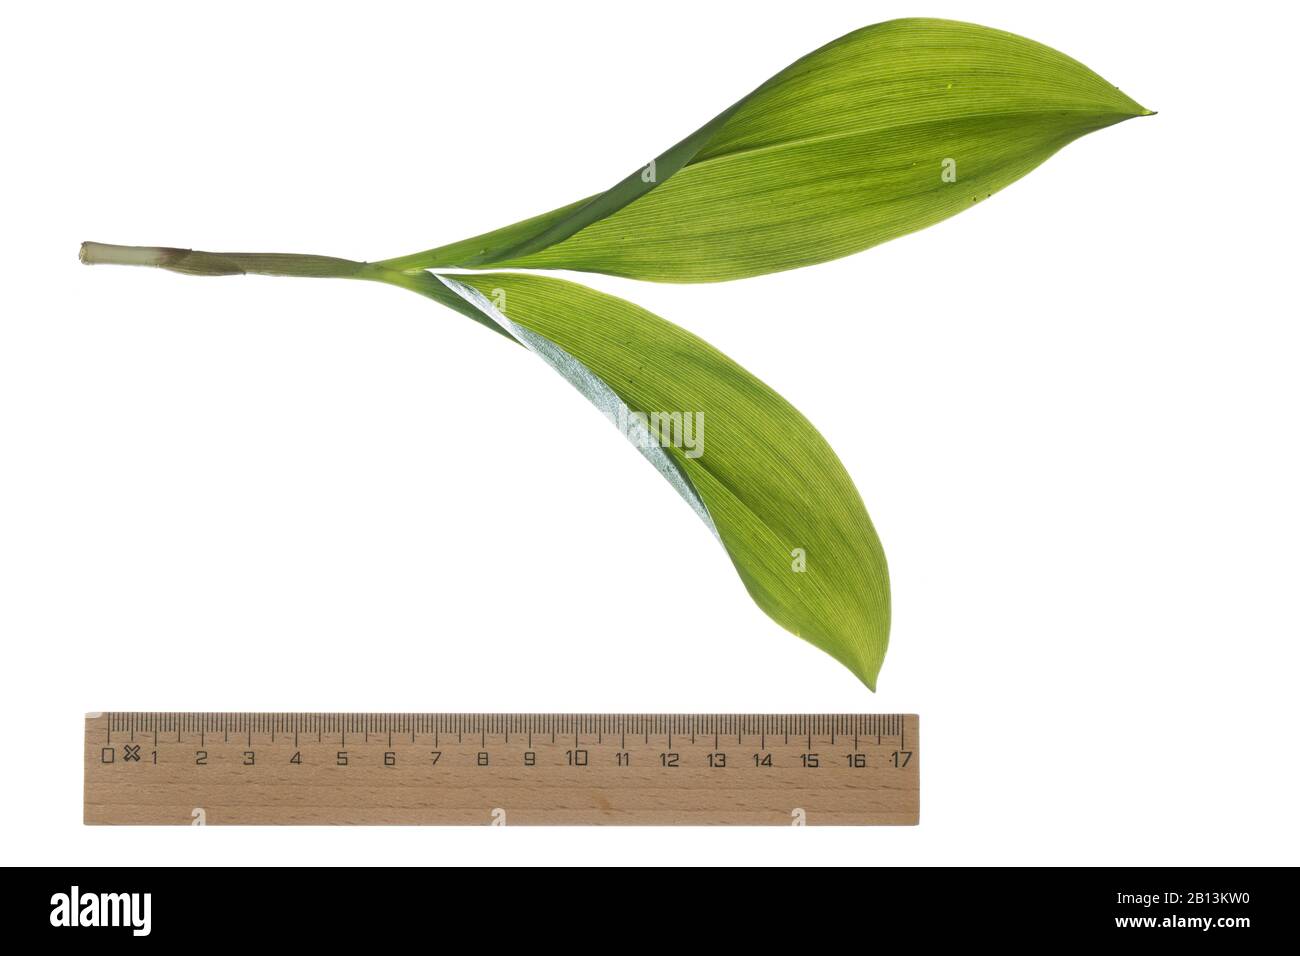 European lily-of-the-valley (Convallaria majalis), leaves, cutout with ruler, Germany Stock Photo